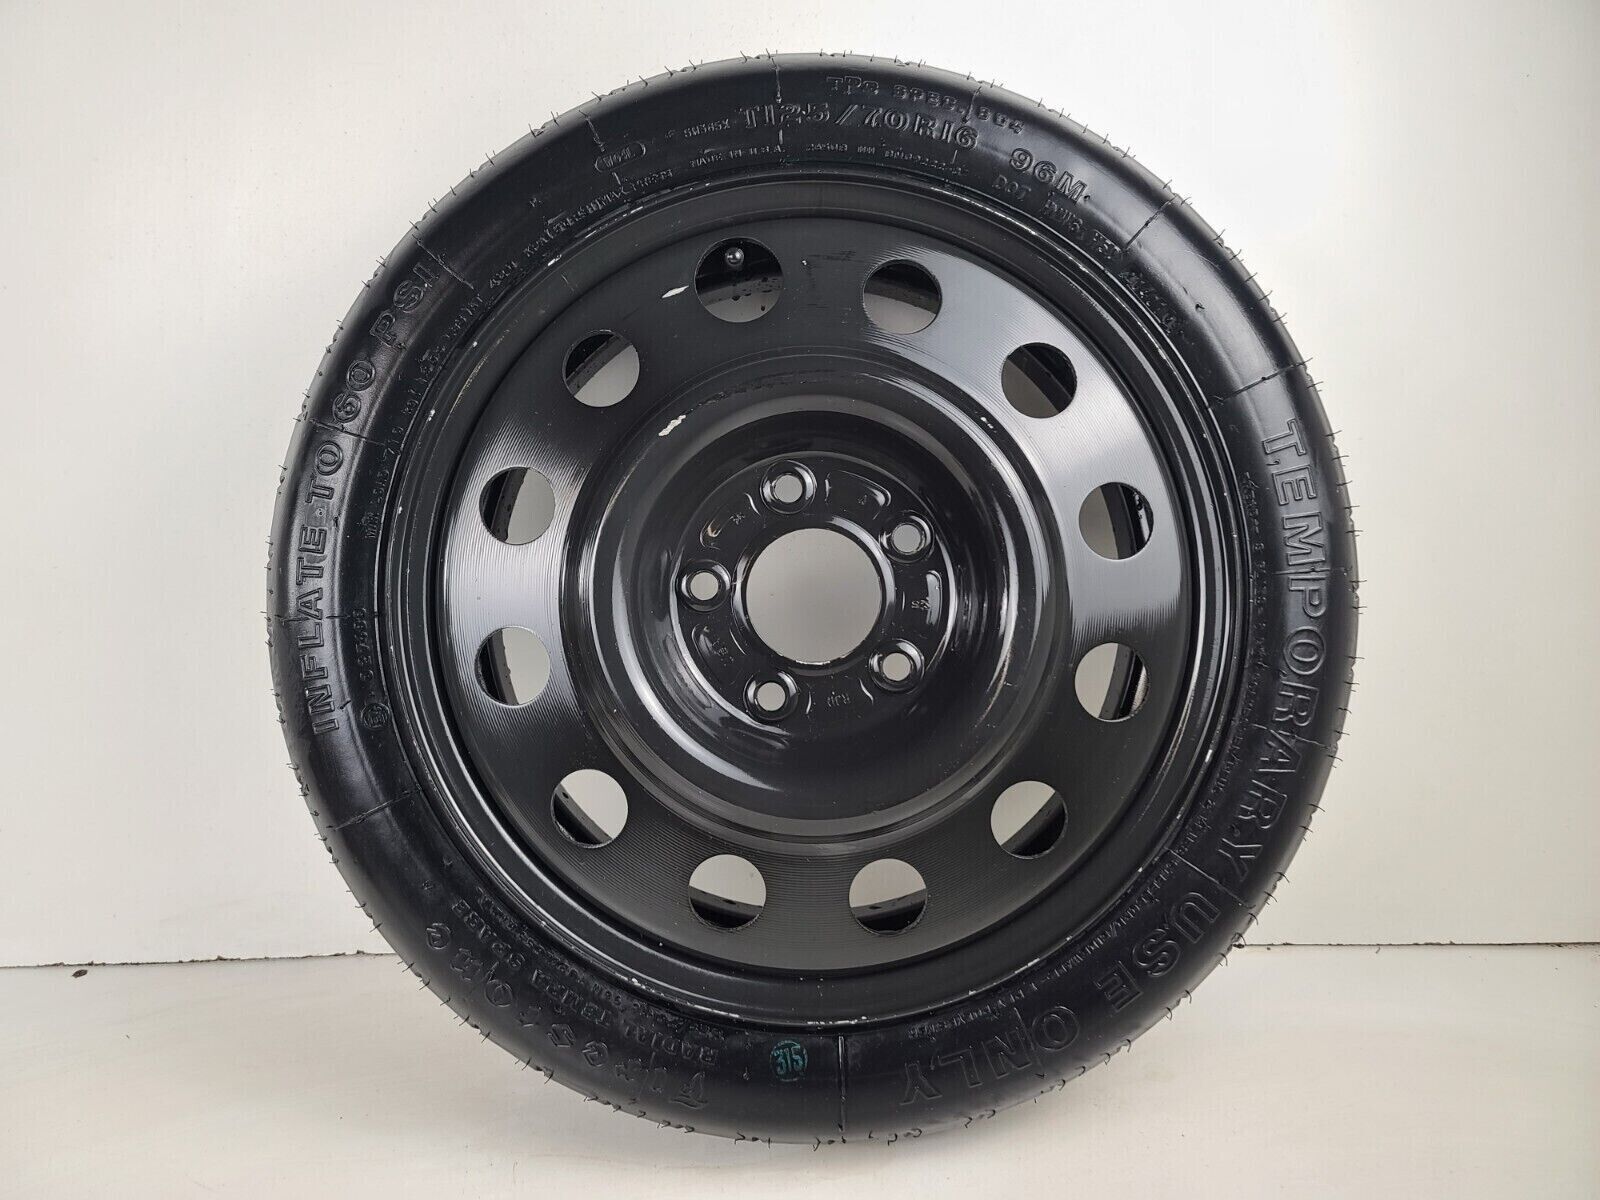 2005 Cheverolet Uplander Compact Spare Tire Donut 16'' OEM